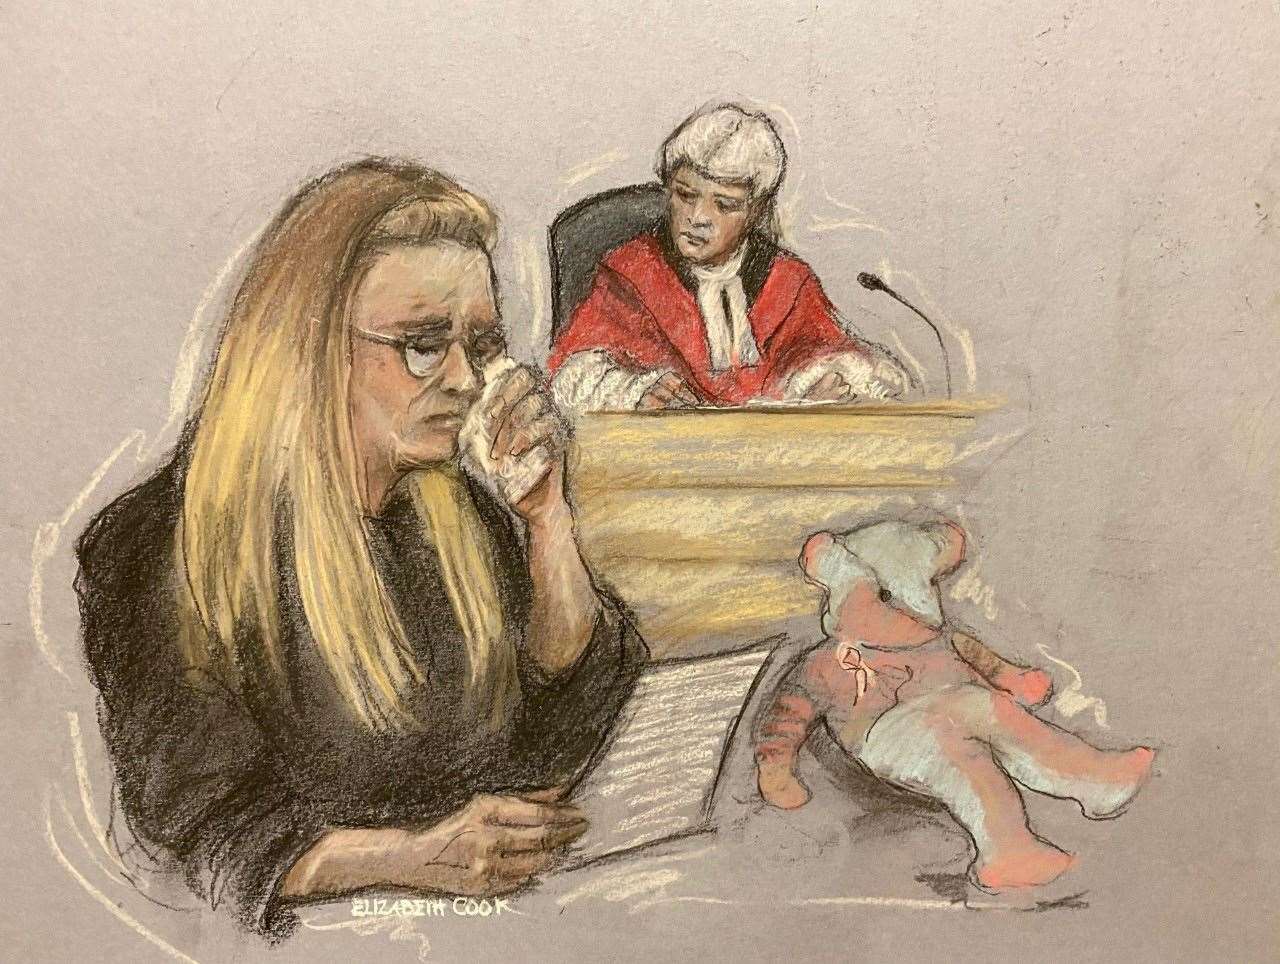 Cheryl Korbel giving her witness statement at Manchester Crown Court (Elizabeth Cook/PA)